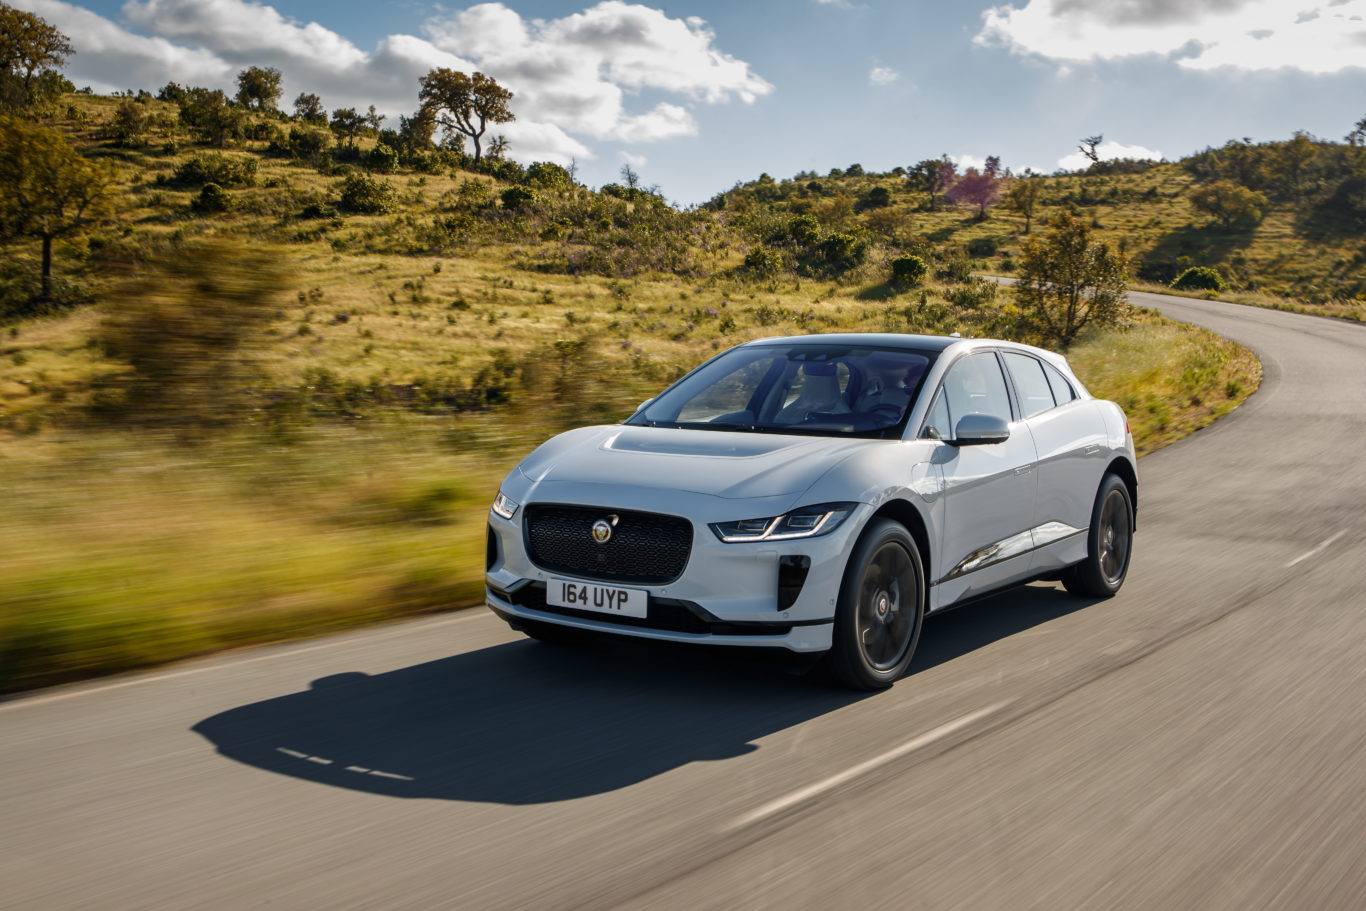 Jaguar's I-Pace is a luxurious all-electric choice